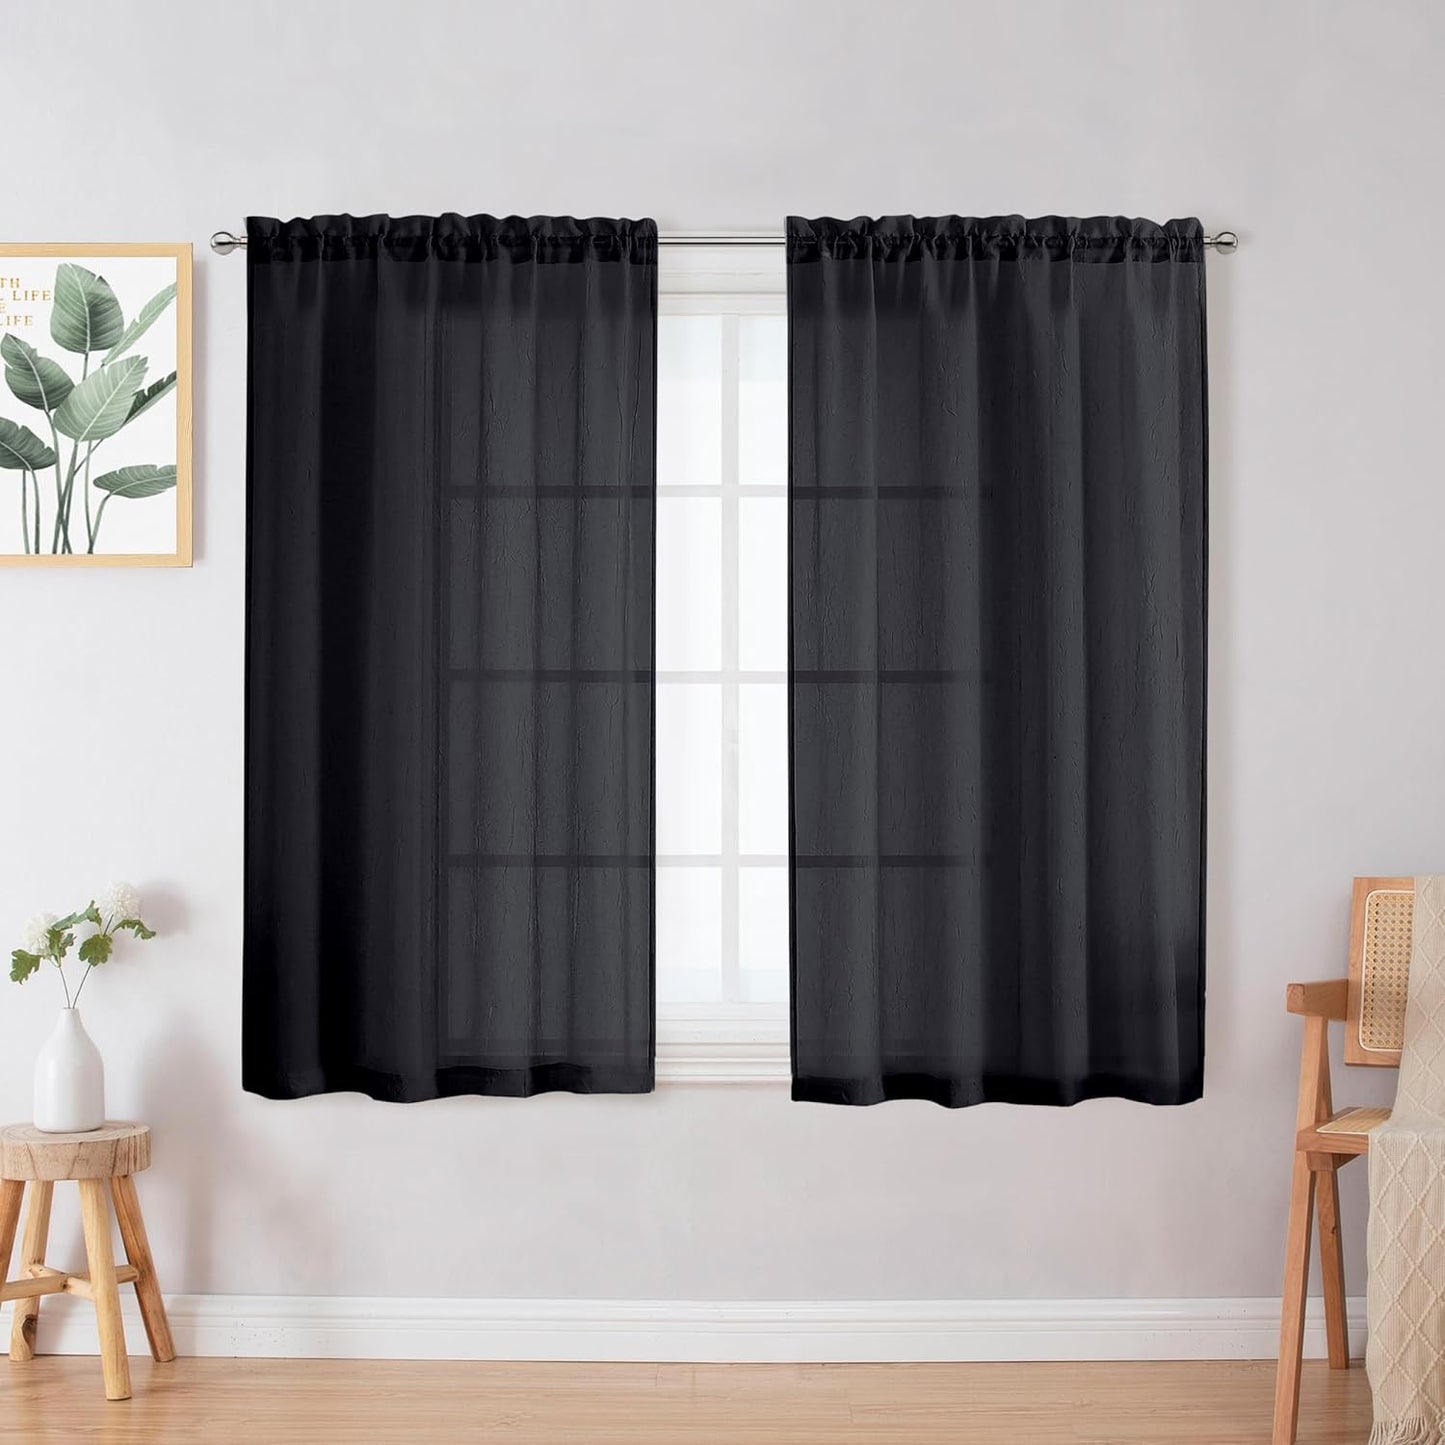 Crushed Sheer White Curtains 63 Inch Length 2 Panels, Light Filtering Solid Crinkle Voile Short Sheer Curtian for Bedroom Living Room, Each 42Wx63L Inches  Chyhomenyc Black 28 W X 45 L 